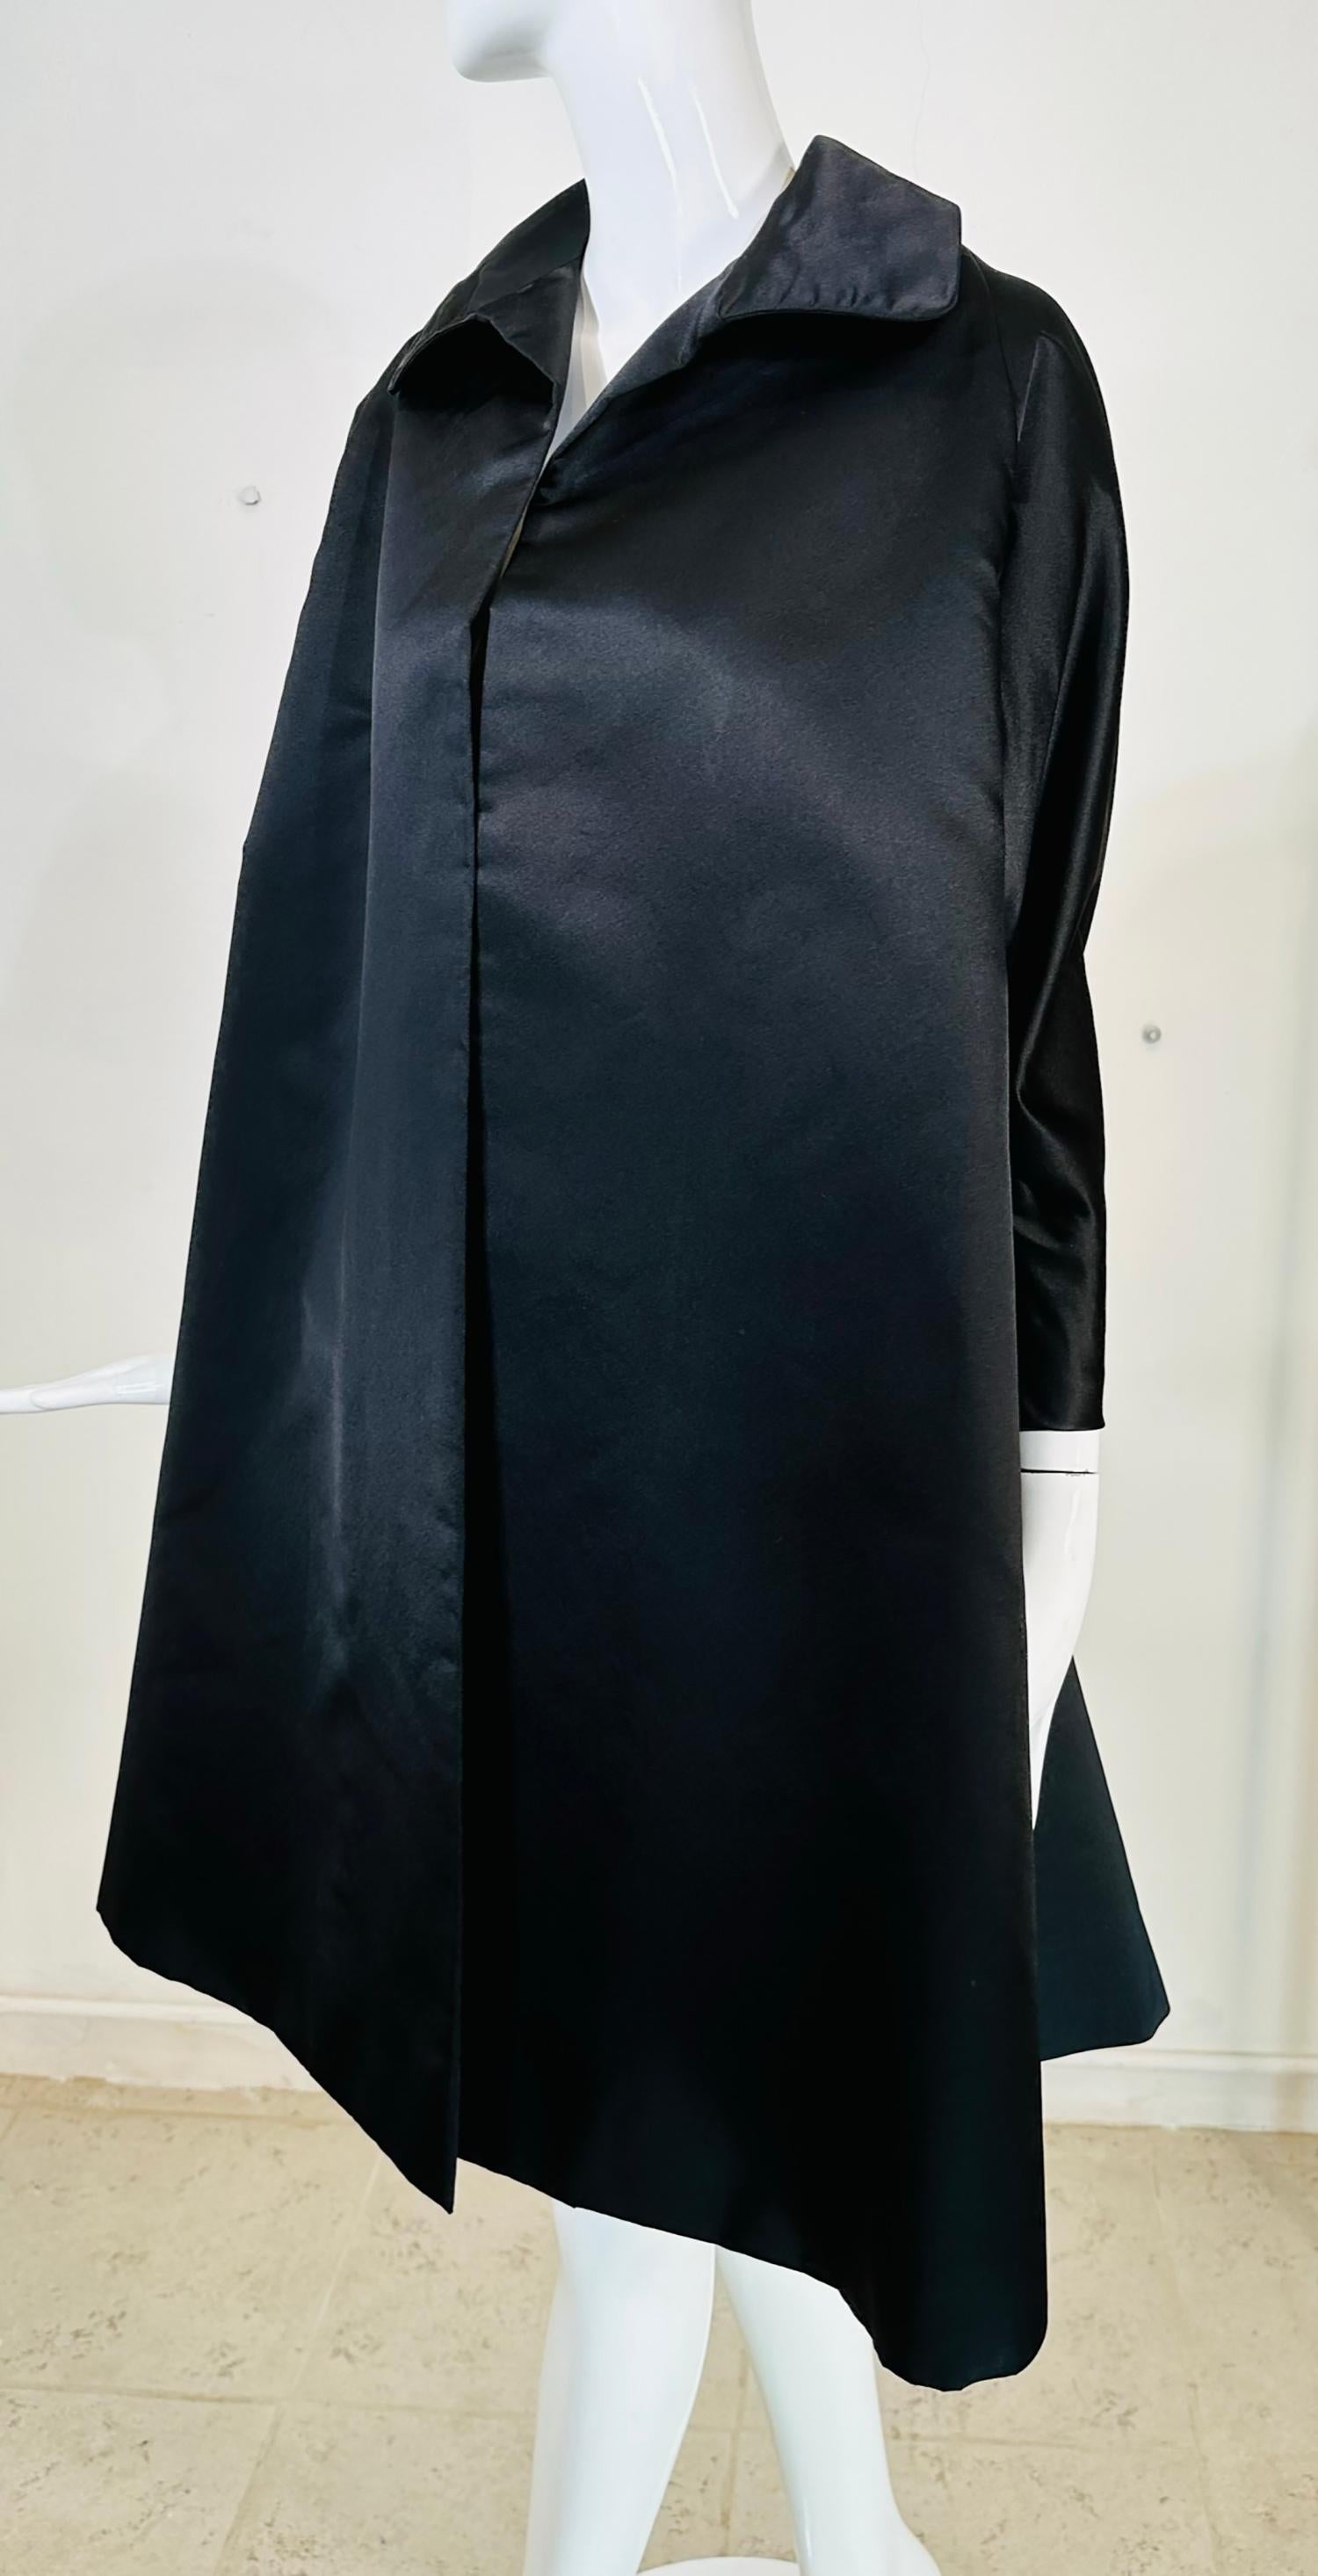 Bergdorf Goodman demi couture, trapeze shape black silk satin evening coat from the 1950s. This gorgeous coat is perfect for any special occasion, I would consider it mid weight for Autumn or early Winter. The coat is interlined so there will be a